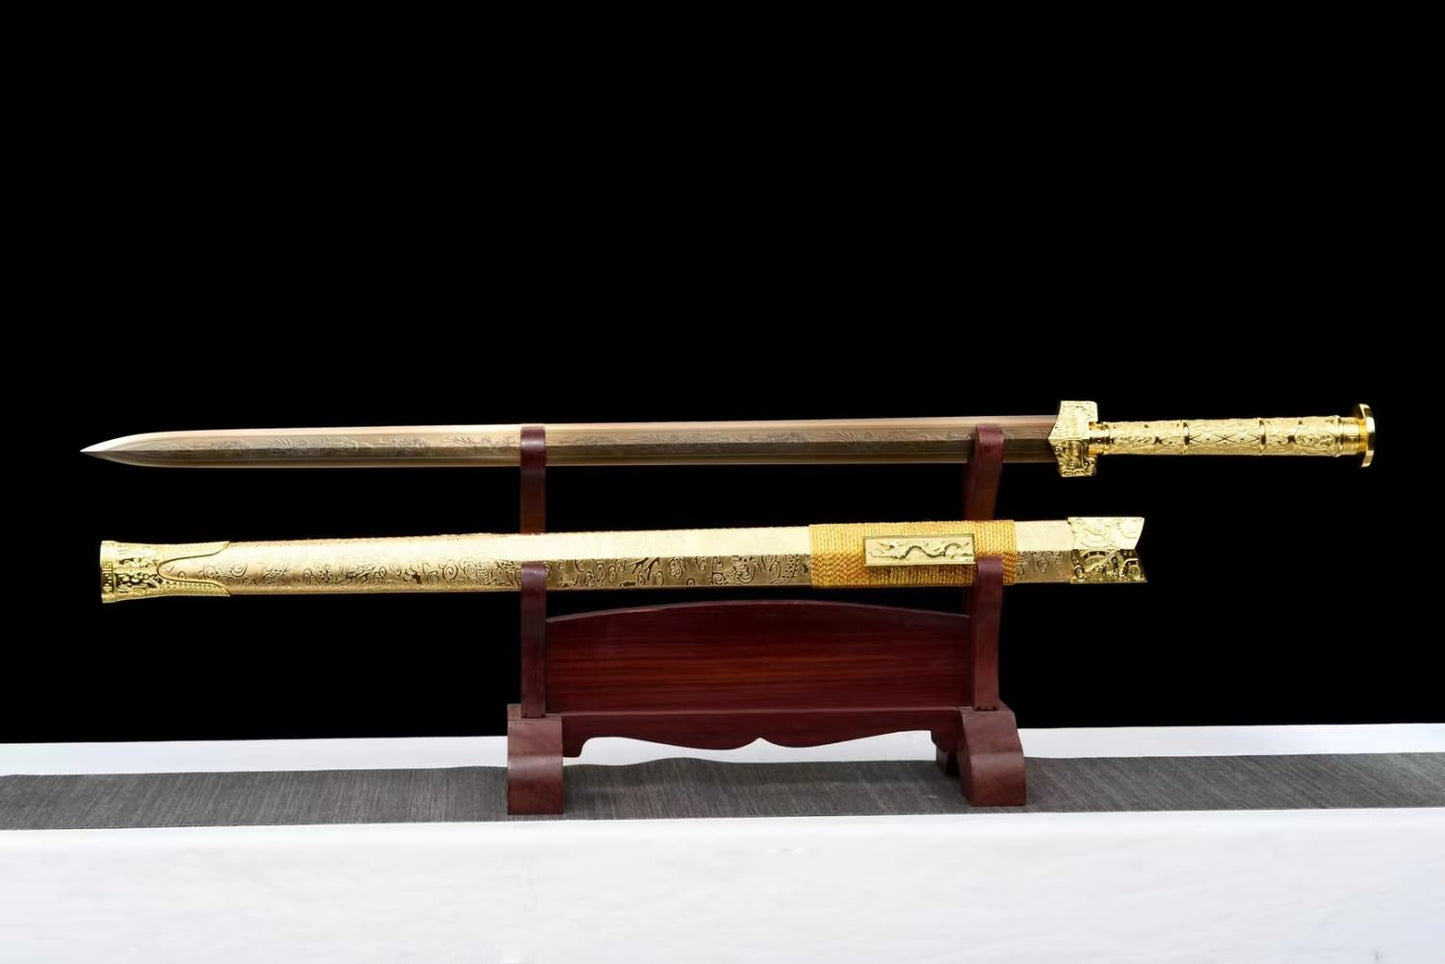 Han jian Sword-Forged High Manganese Steel Blade,Golden Appearance,Faux Leather Scabbard